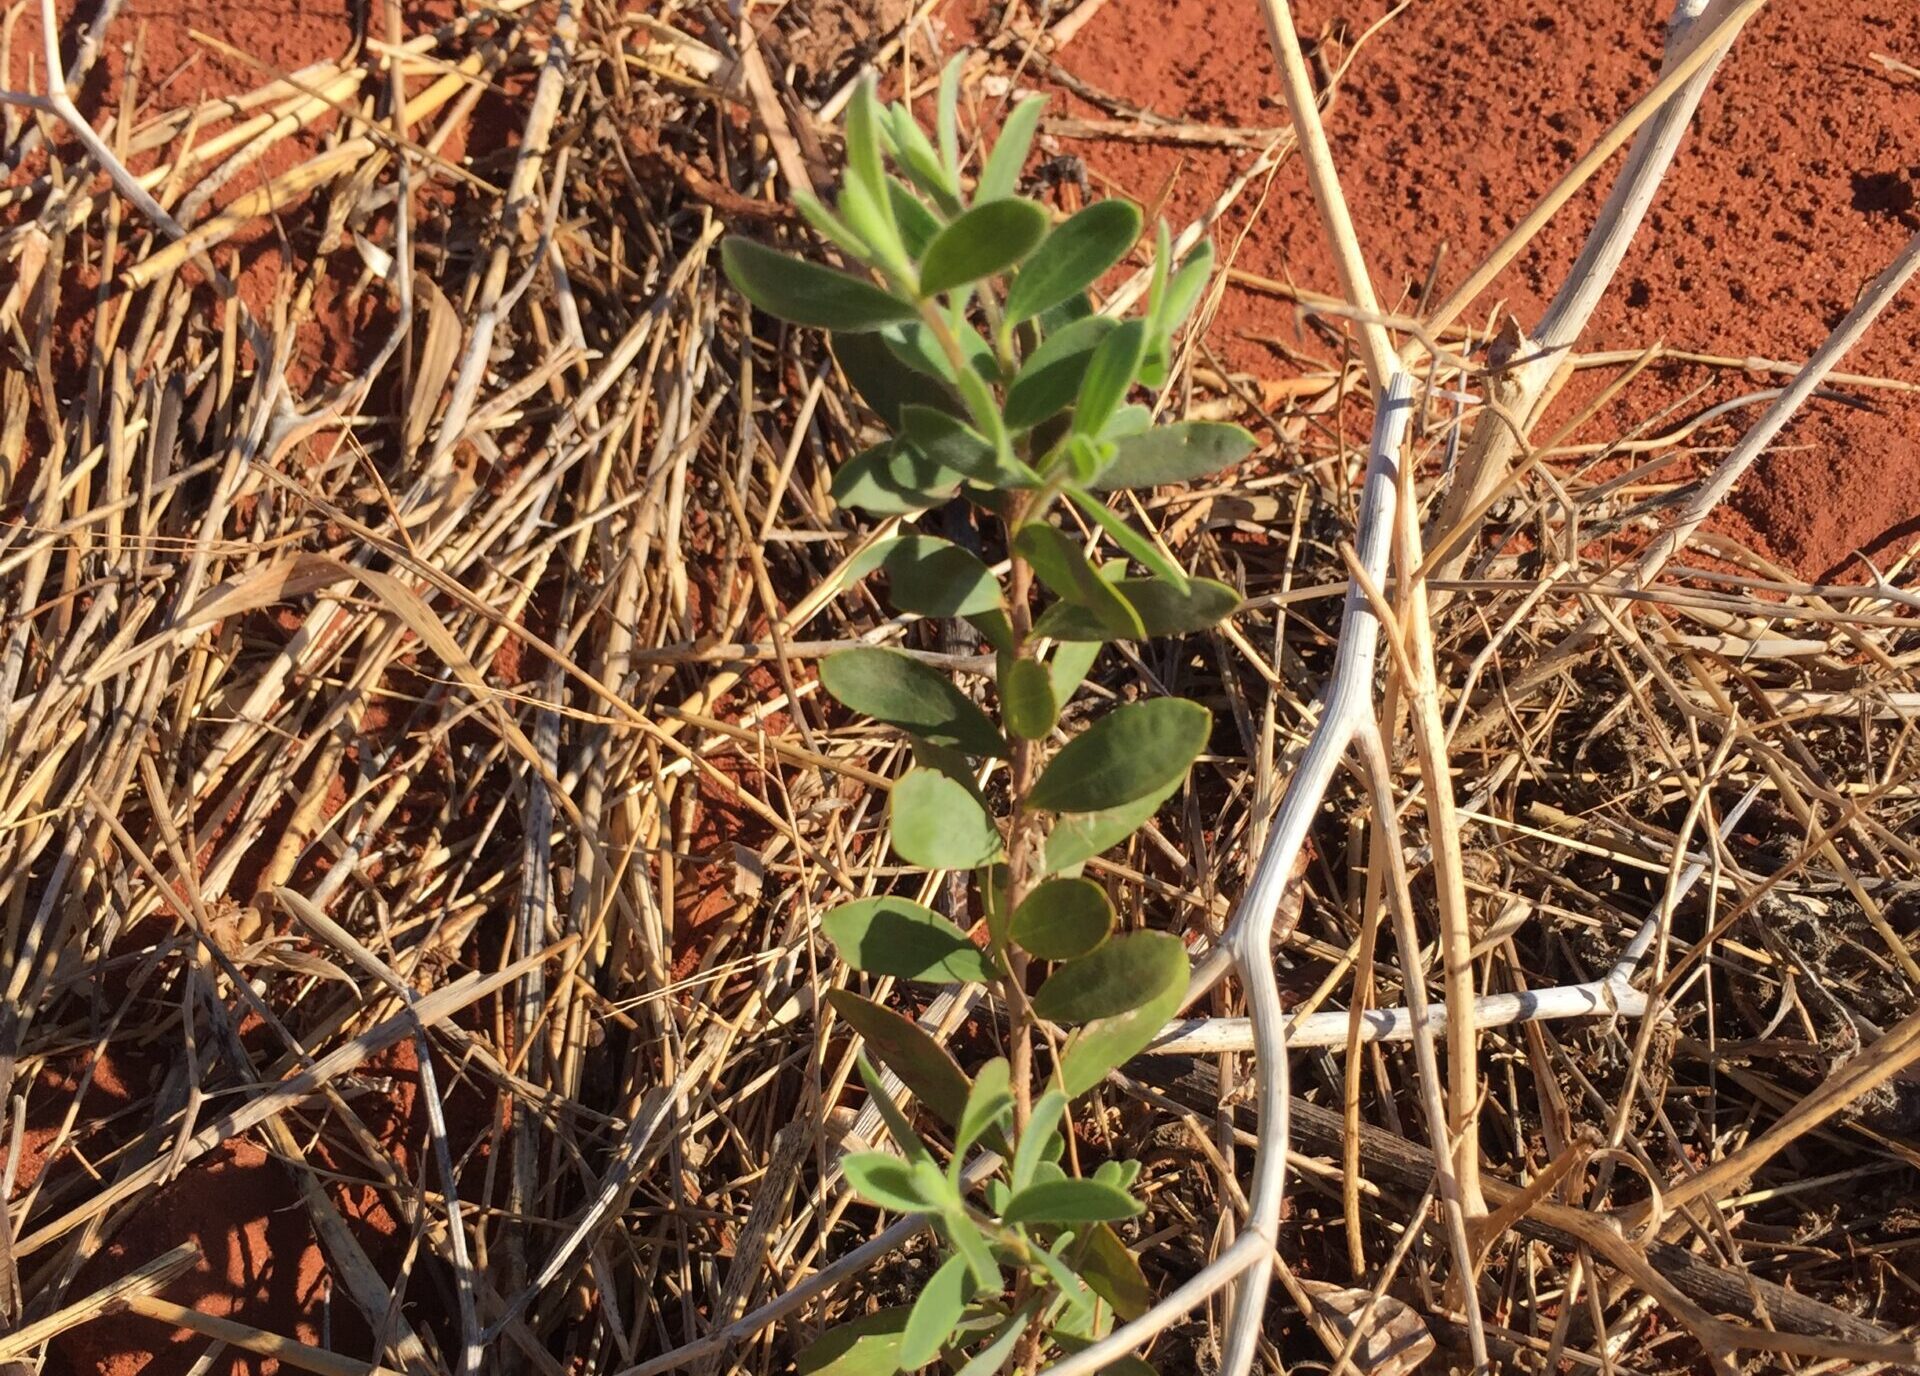 Close up photo of a small seedling growing in red soil.